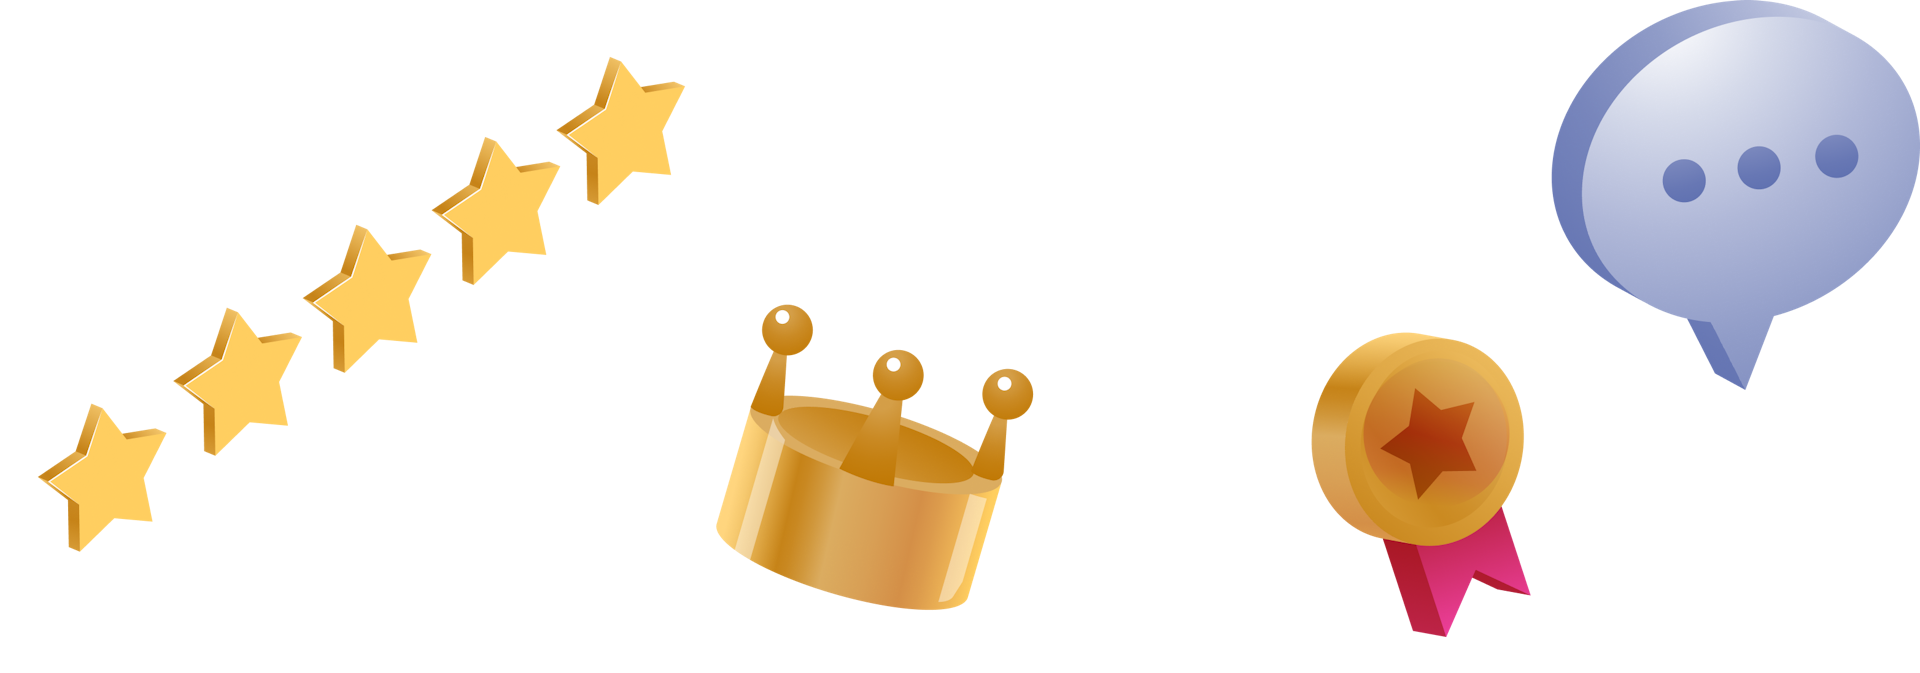 star icons and a crown